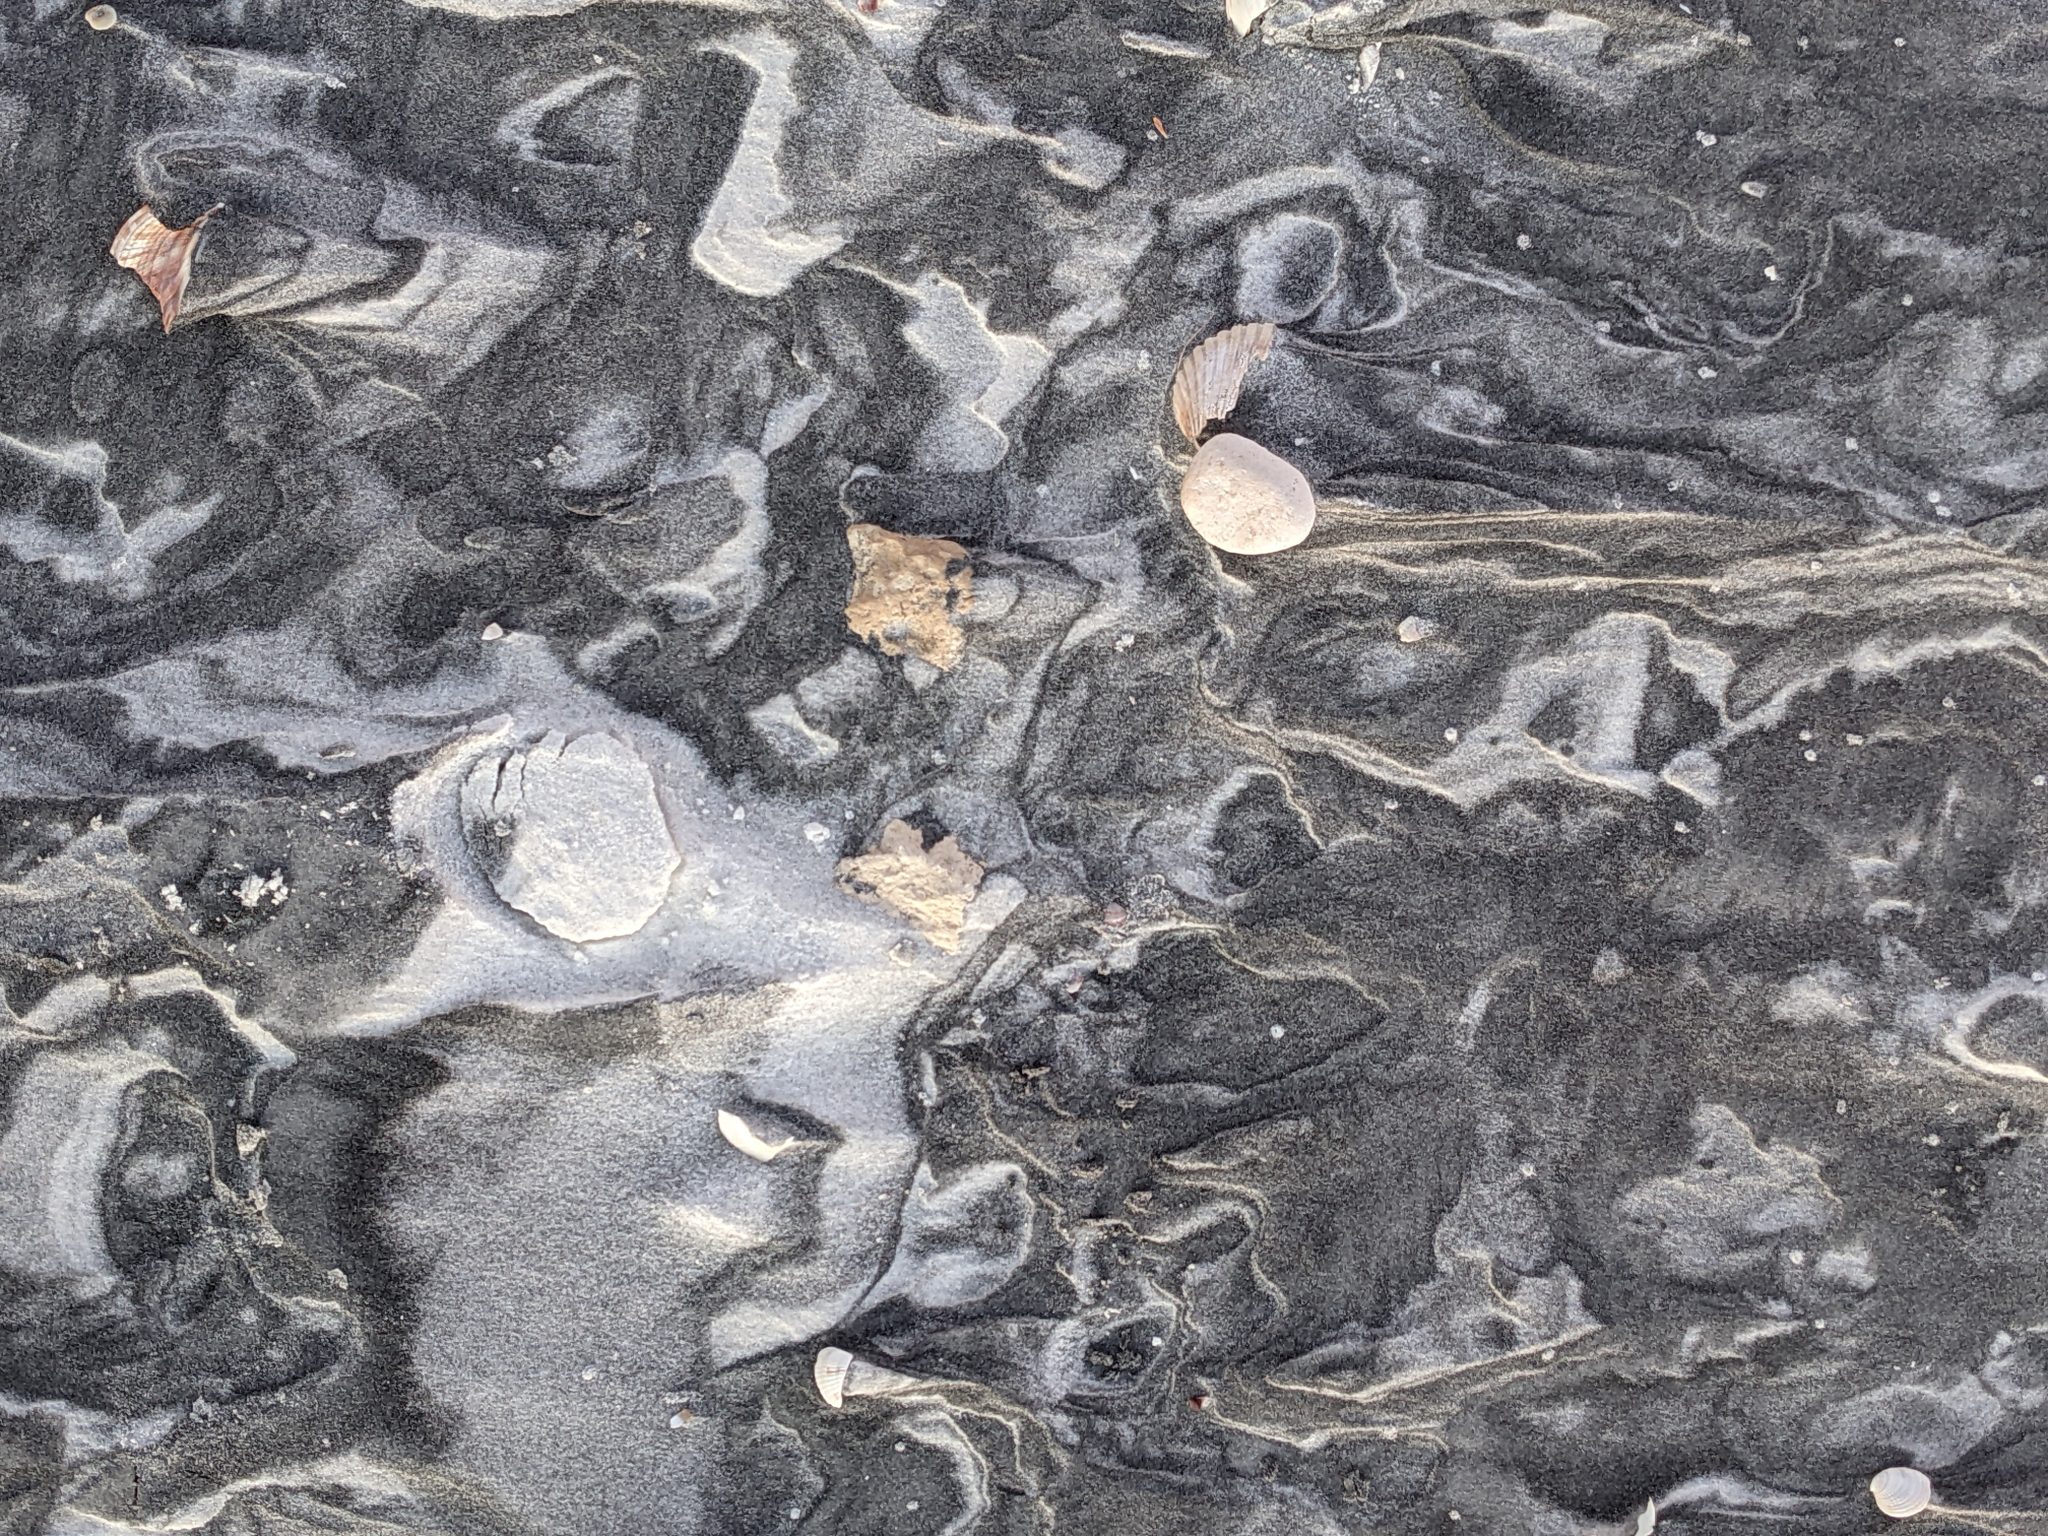 Sand on the beach, windblown, marbled and strewn with shells and pebbles.